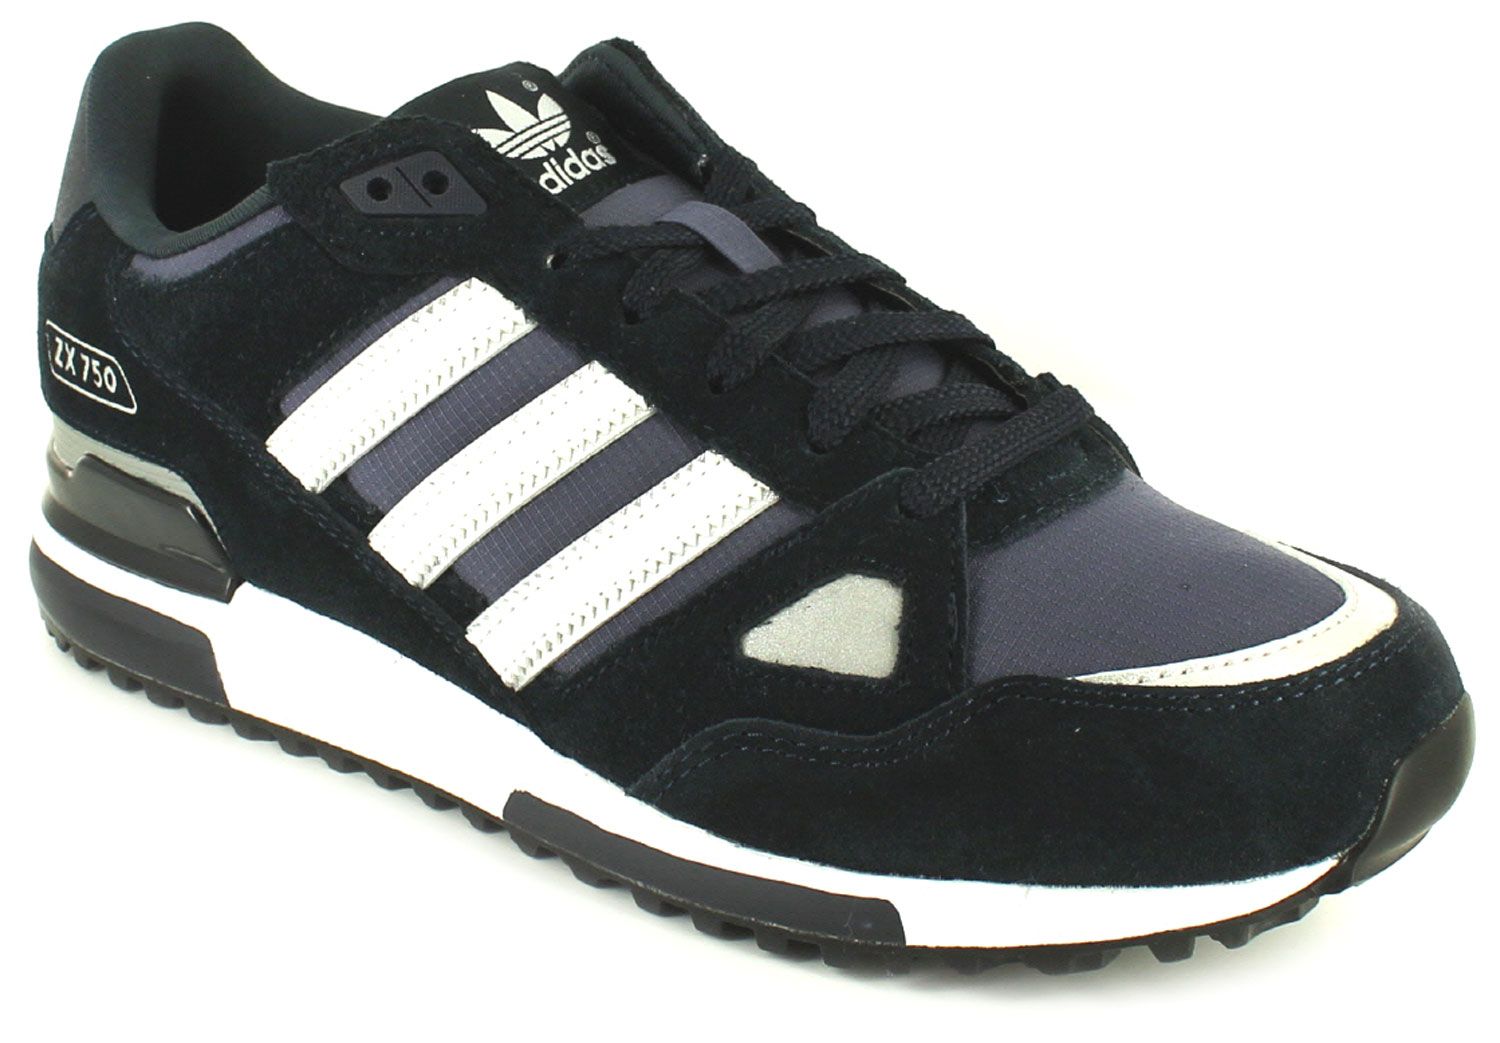 New Mens/Gents Navy/White Adidas Leather Lightweight Running Shoes